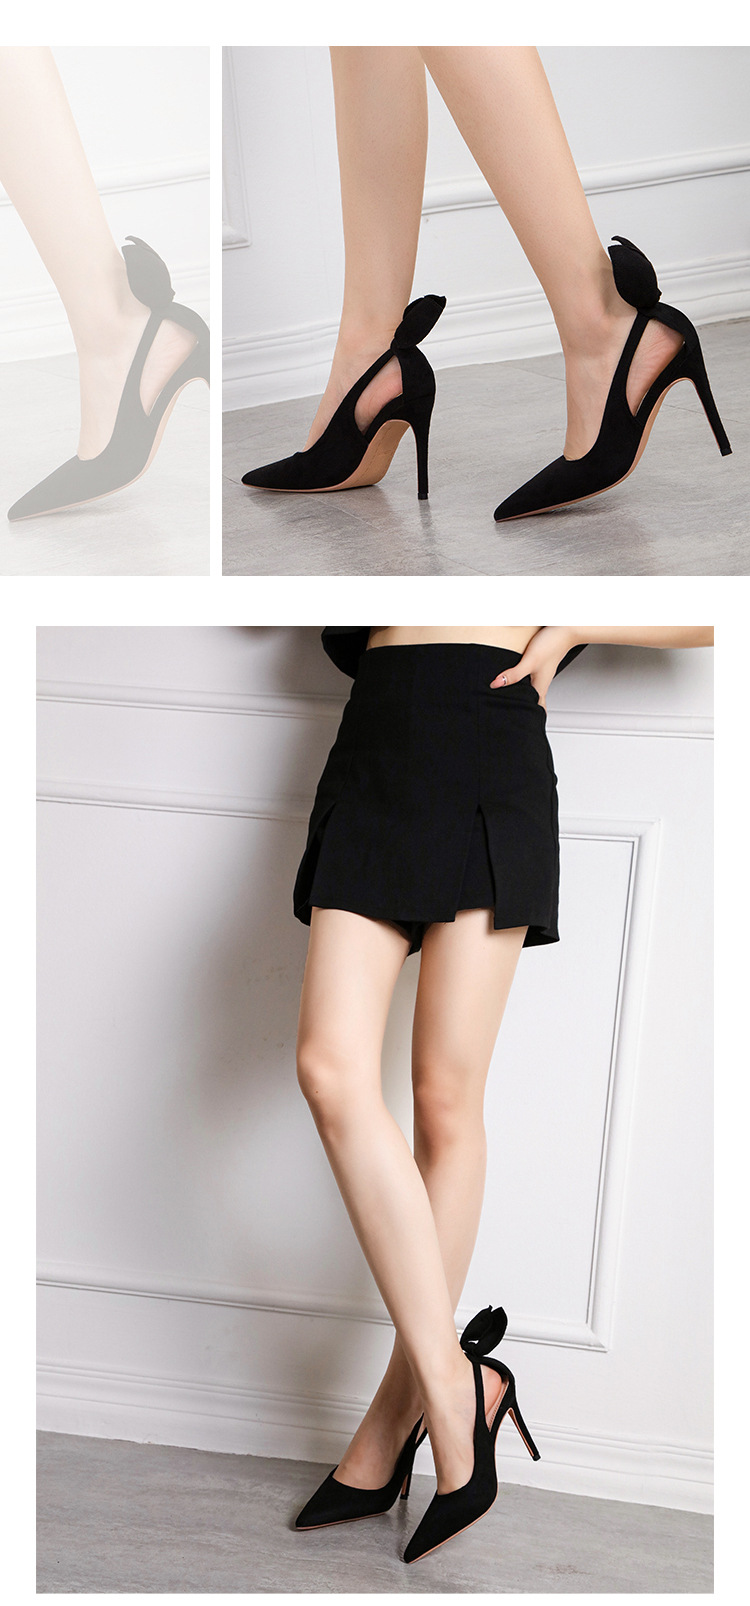 Low banquet shoes European style pointed high-heeled shoes